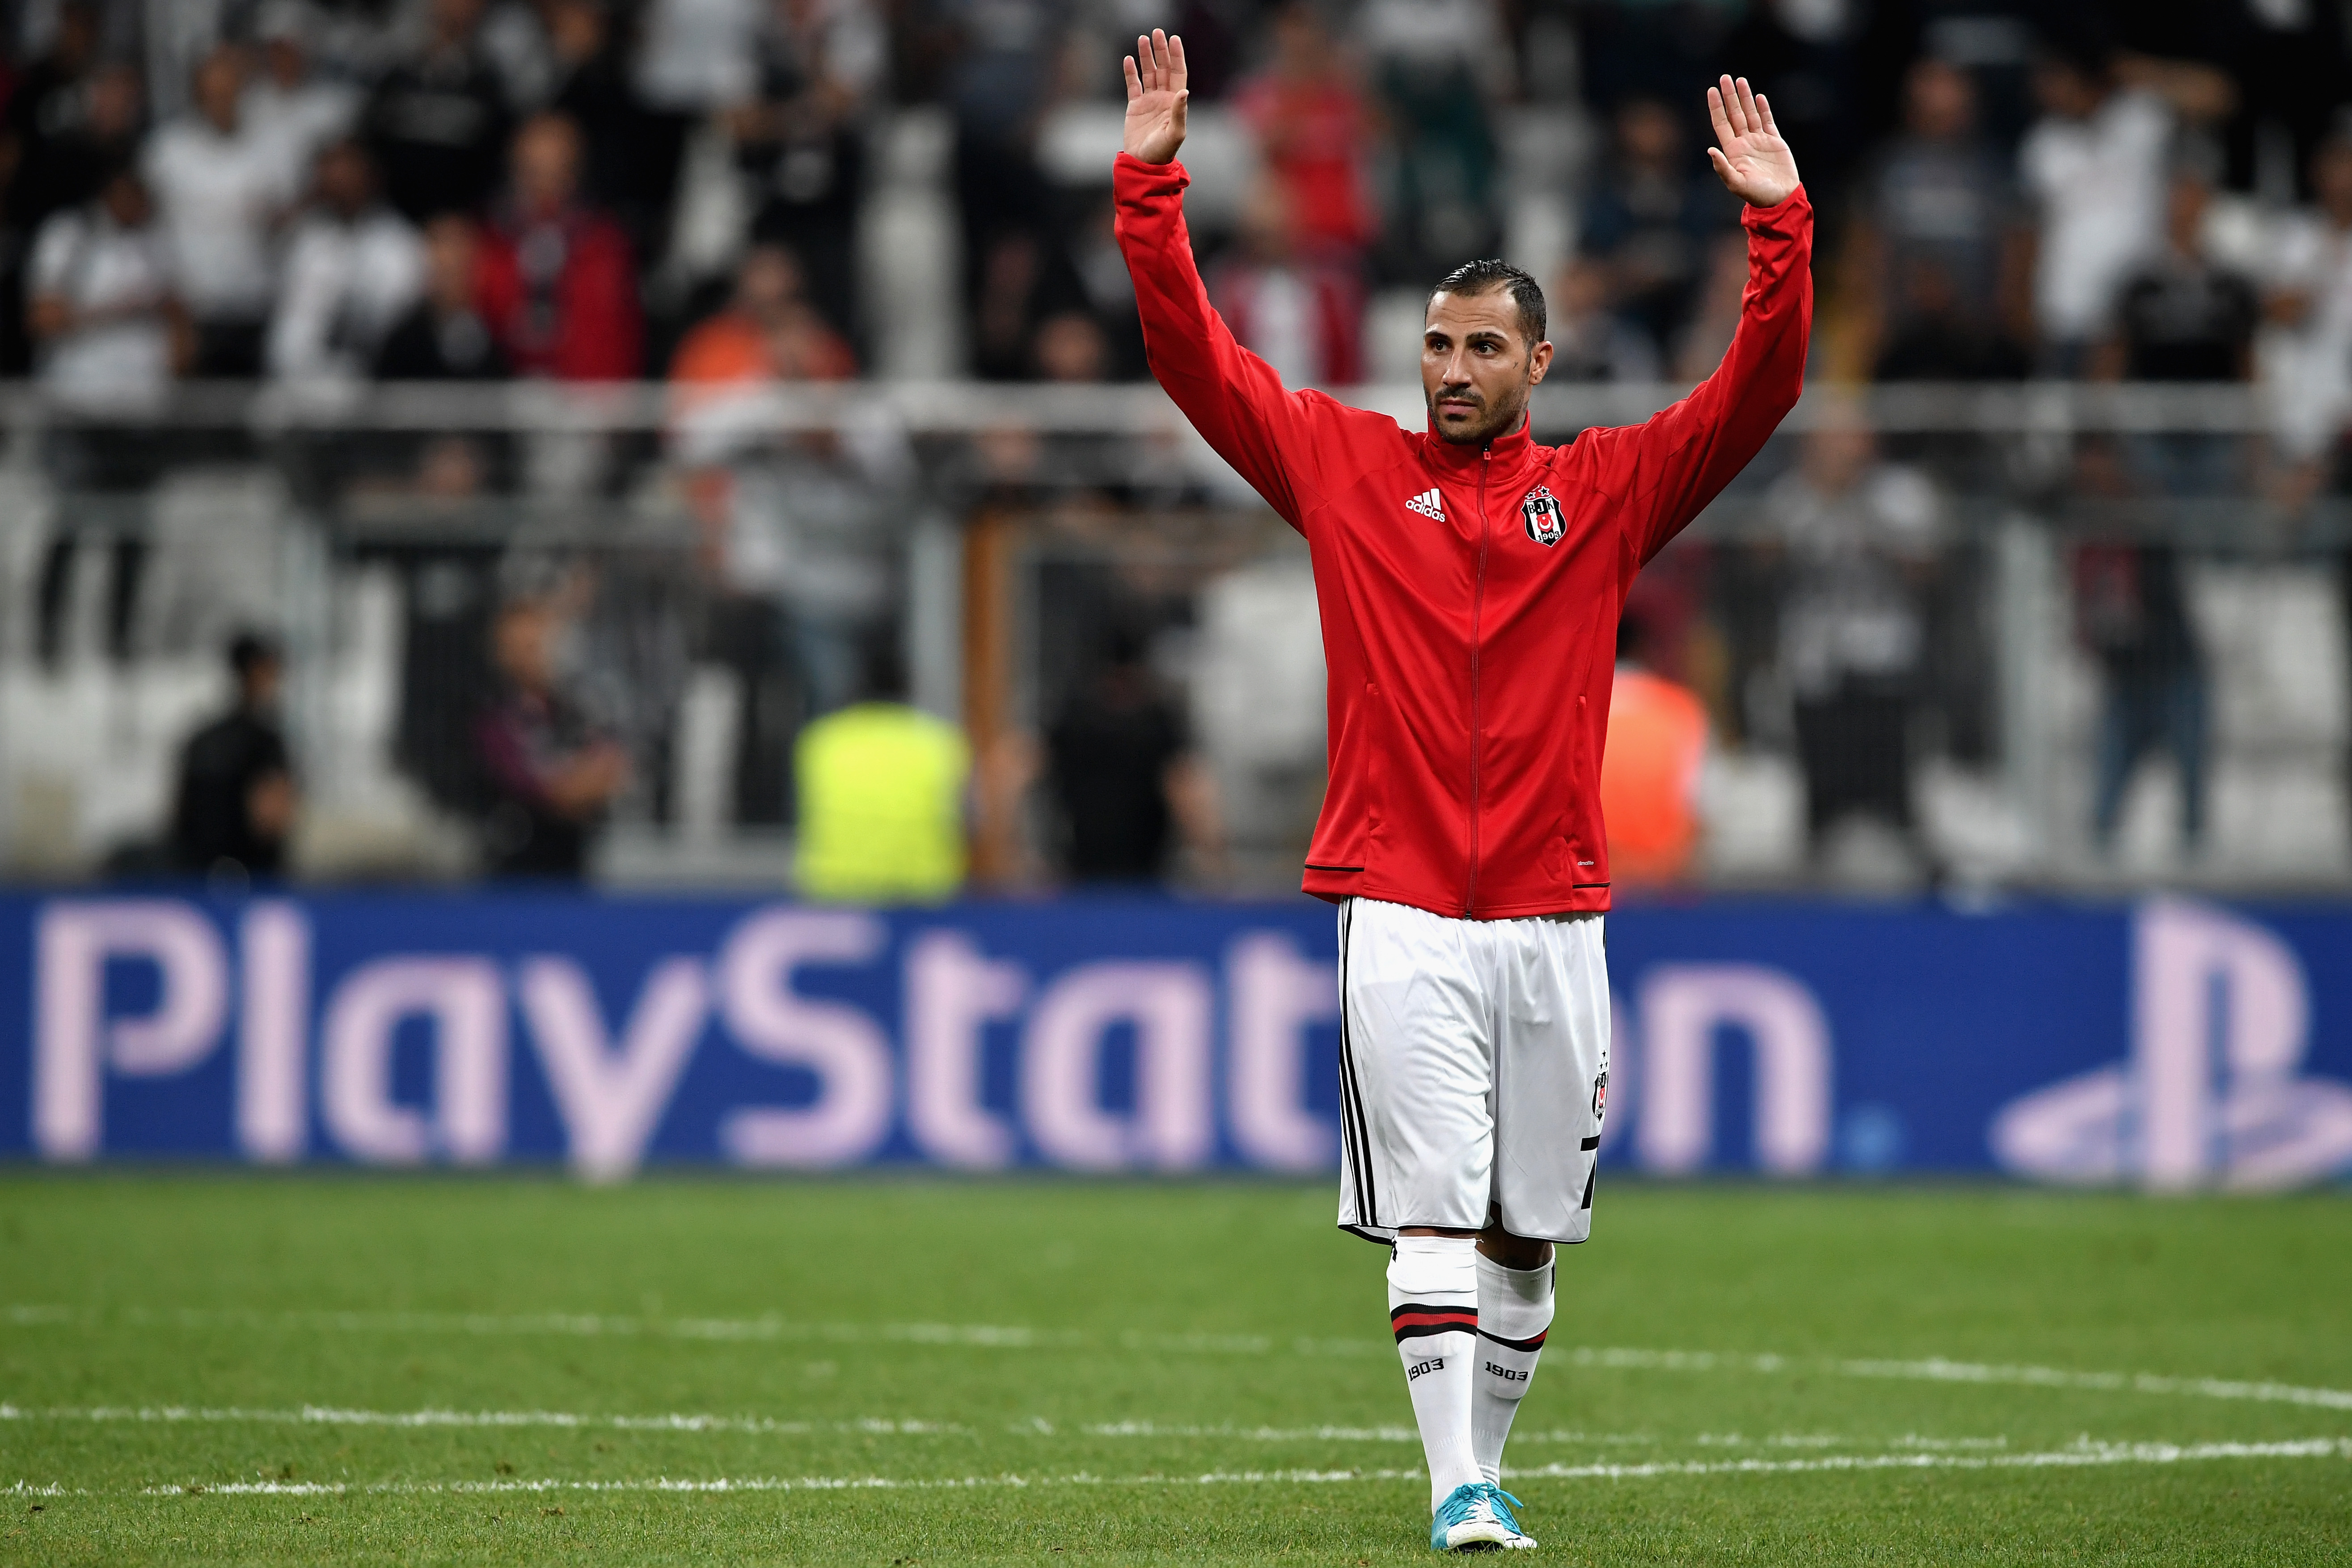 ISTANBUL, TURKEY - SEPTEMBER 26:  Ricardo Quaresma of Besiktas salutes the crowd after the UEFA Champions League Group G match between Besiktas and RB Leipzig at Besiktas Park on September 26, 2017 in Istanbul, Turkey.  (Photo by Stuart Franklin/Bongarts/Getty Images)